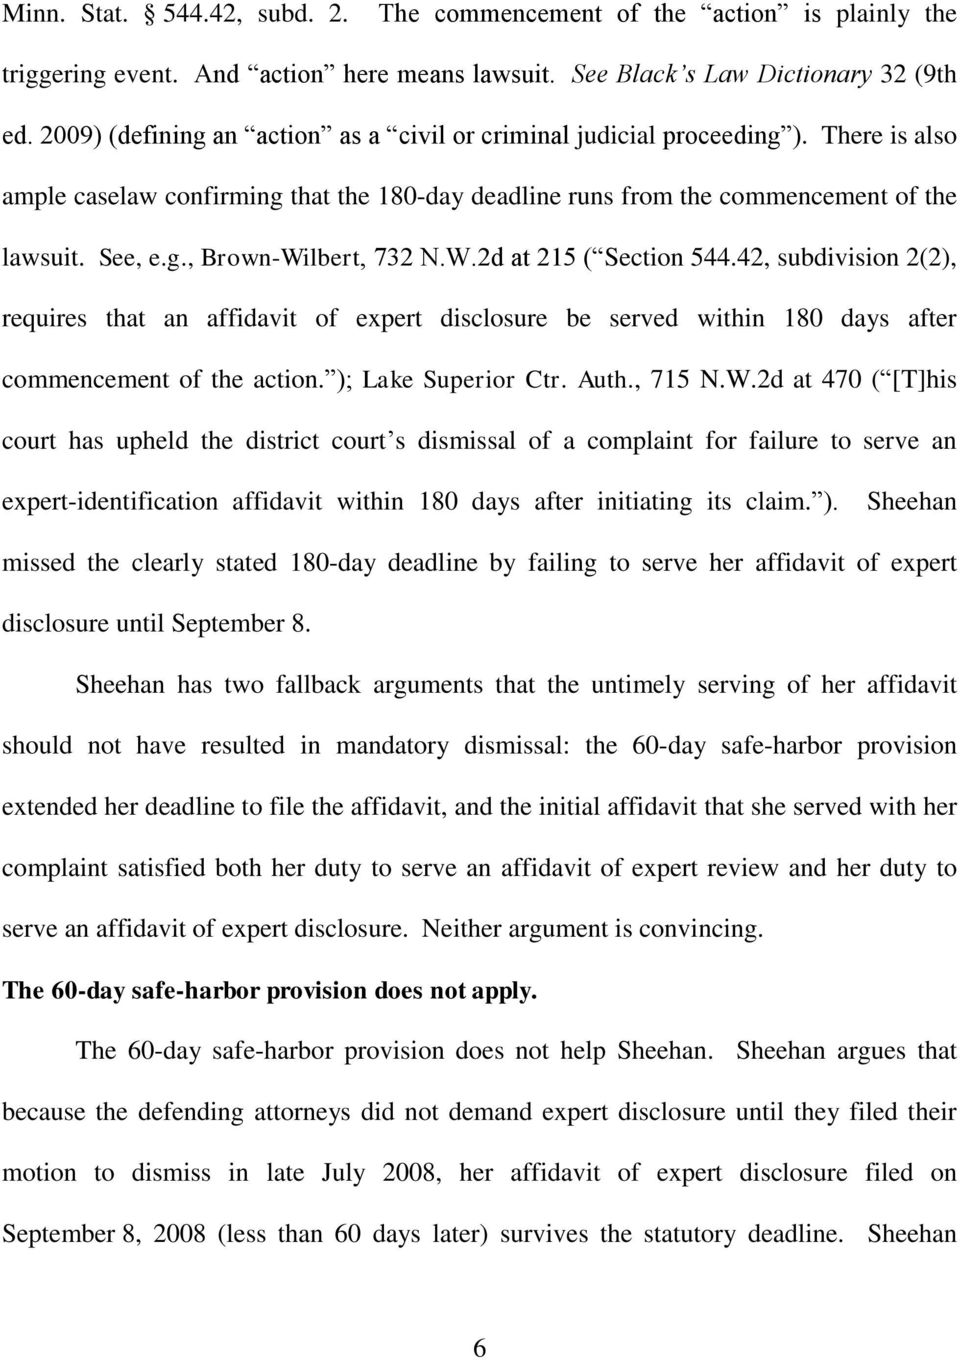 W.2d at 215 ( Section 544.42, subdivision 2(2), requires that an affidavit of expert disclosure be served within 180 days after commencement of the action. ); Lake Superior Ctr. Auth., 715 N.W.2d at 470 ( [T]his court has upheld the district court s dismissal of a complaint for failure to serve an expert-identification affidavit within 180 days after initiating its claim.